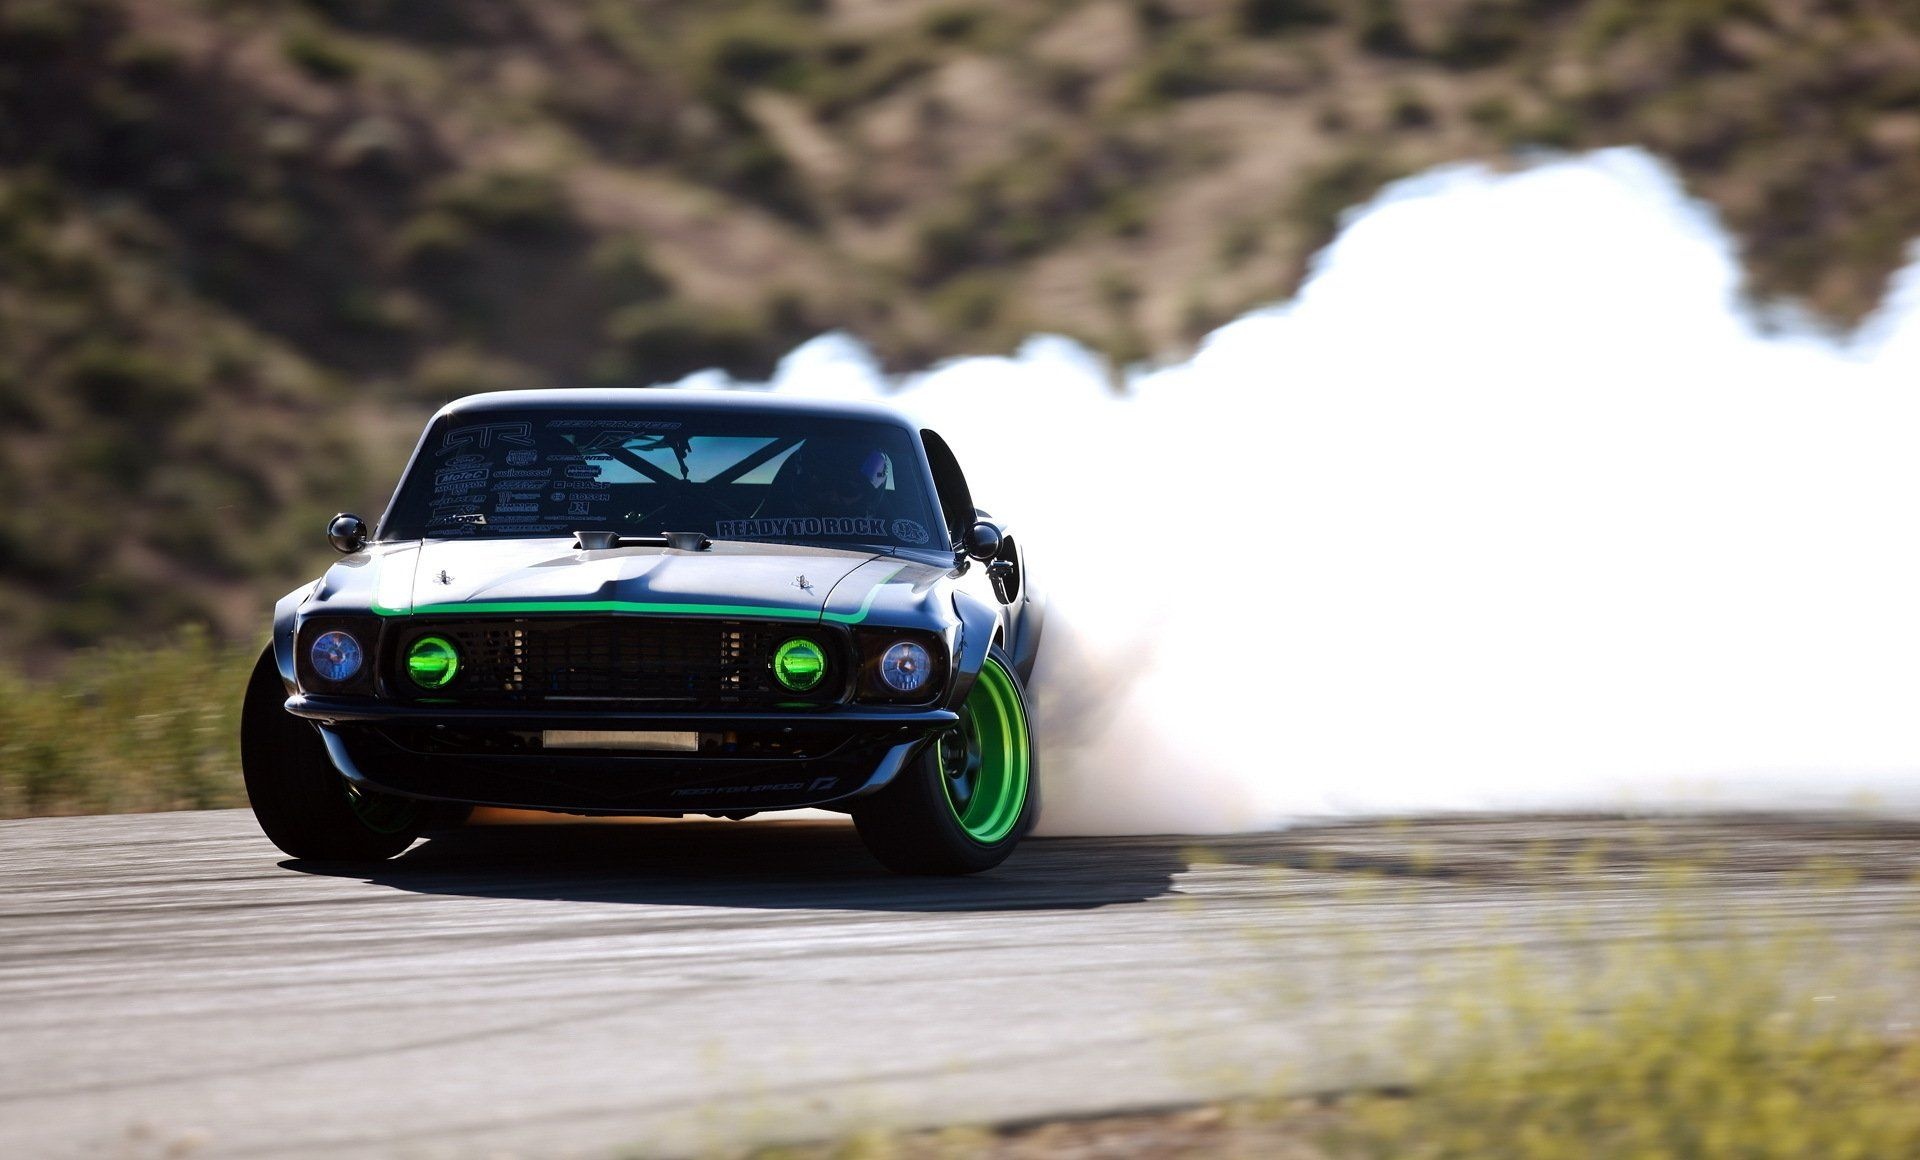 Drifting: Old-fashioned Ford Mustang, Automotive tuning, Sports wheels and rims, Smoking tires. 1920x1160 HD Wallpaper.